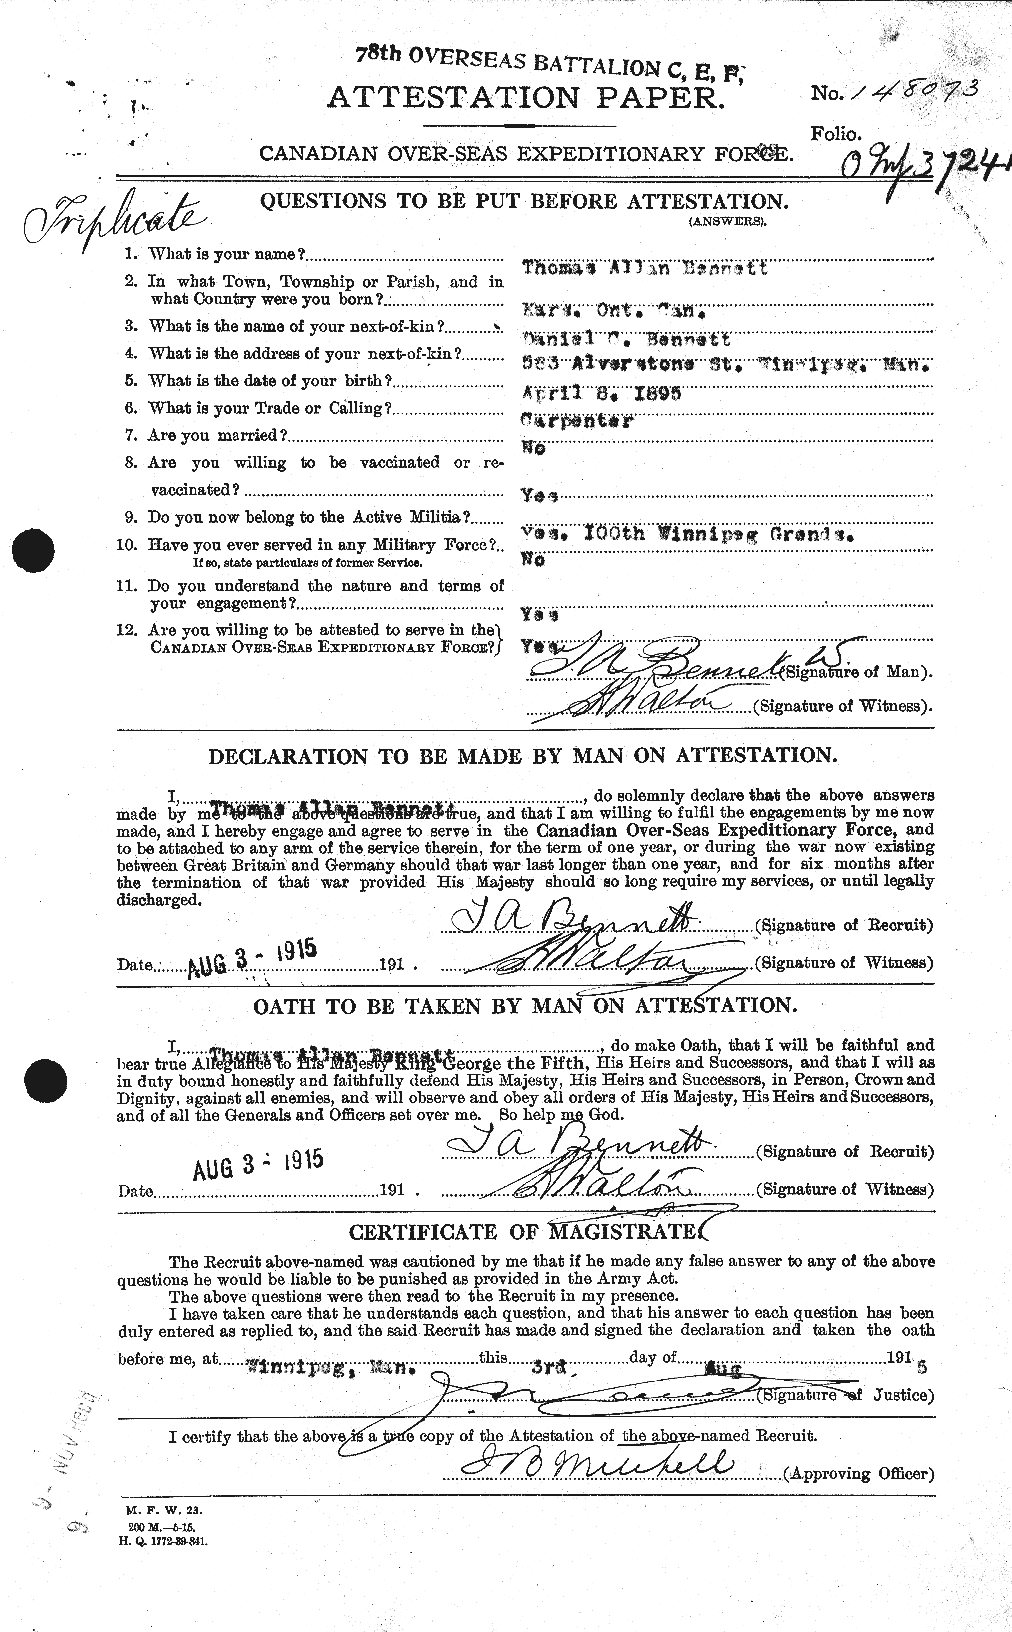 Personnel Records of the First World War - CEF 239934a